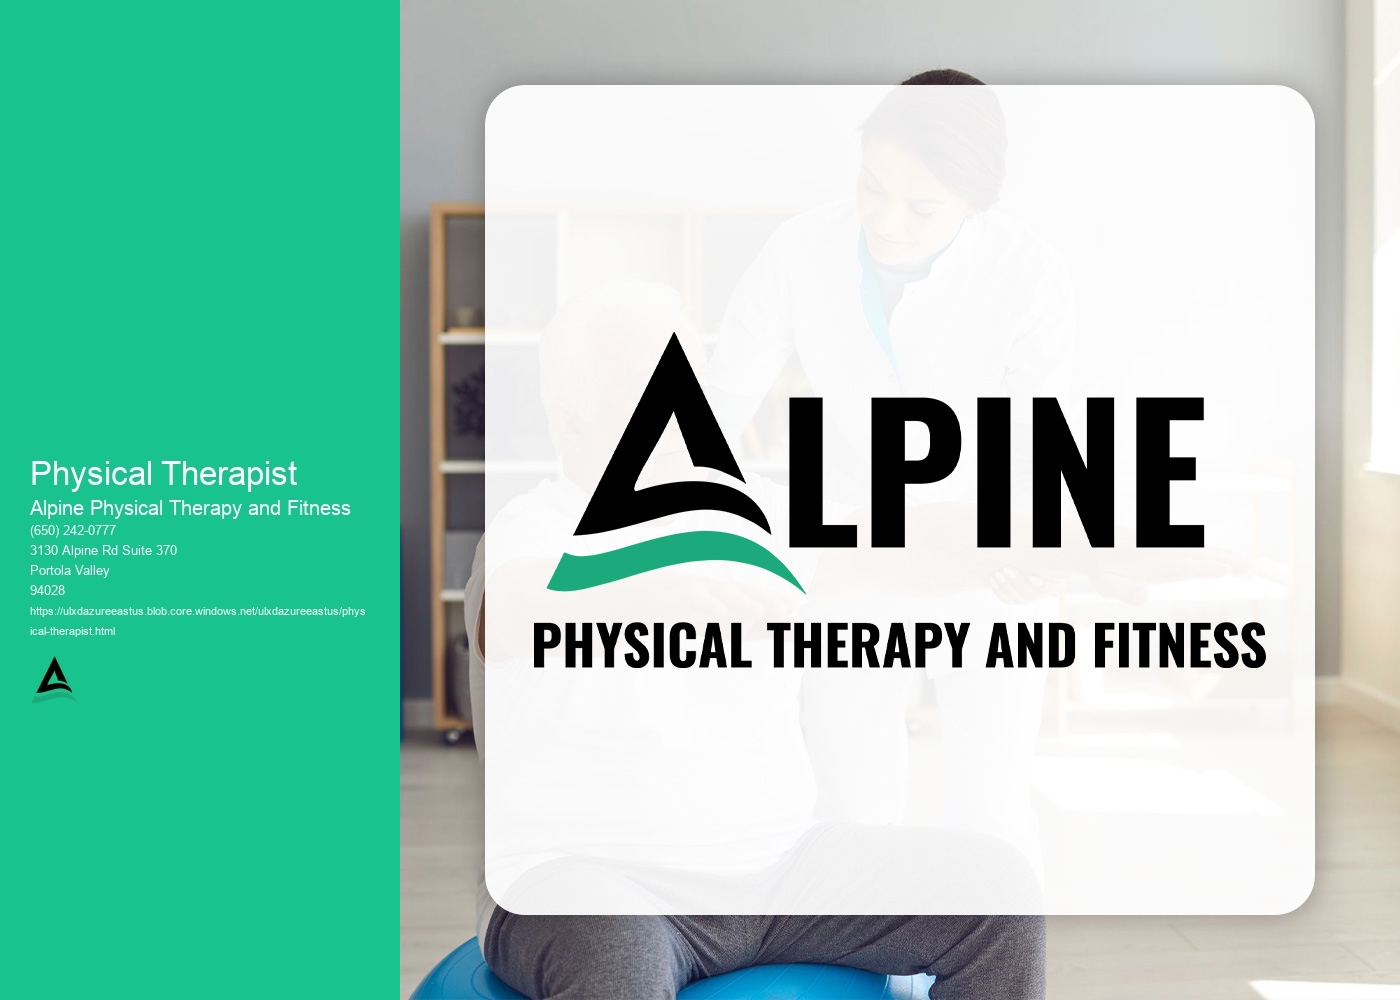 How does physical therapy contribute to the management of conditions such as arthritis and osteoporosis?